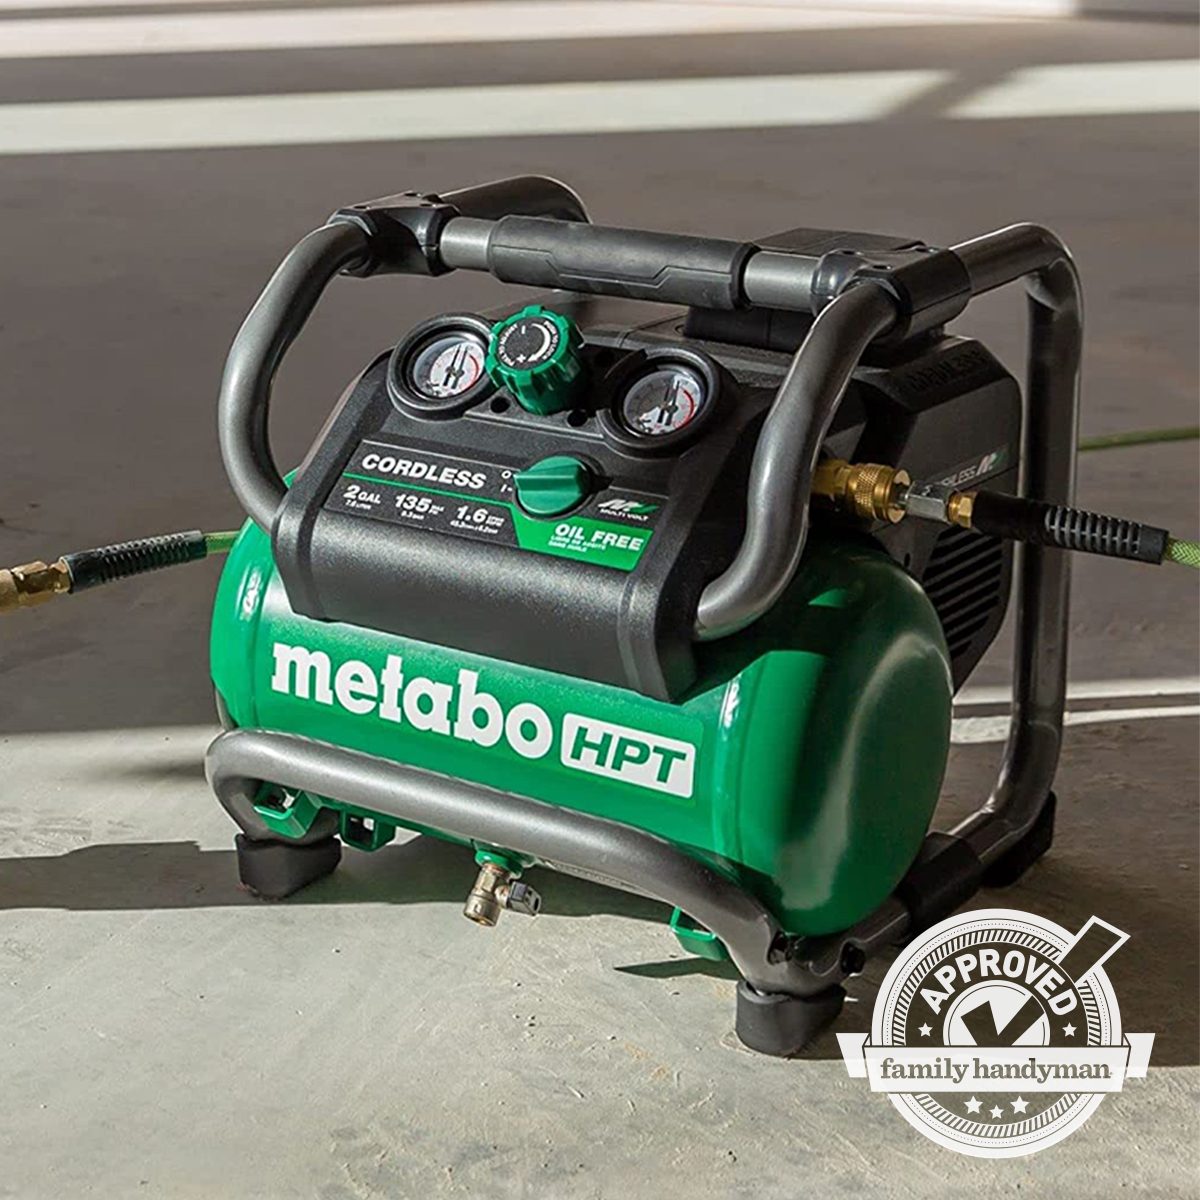 We Tried Metabo Battery Powered Cordless Air Compressor - We Approve!